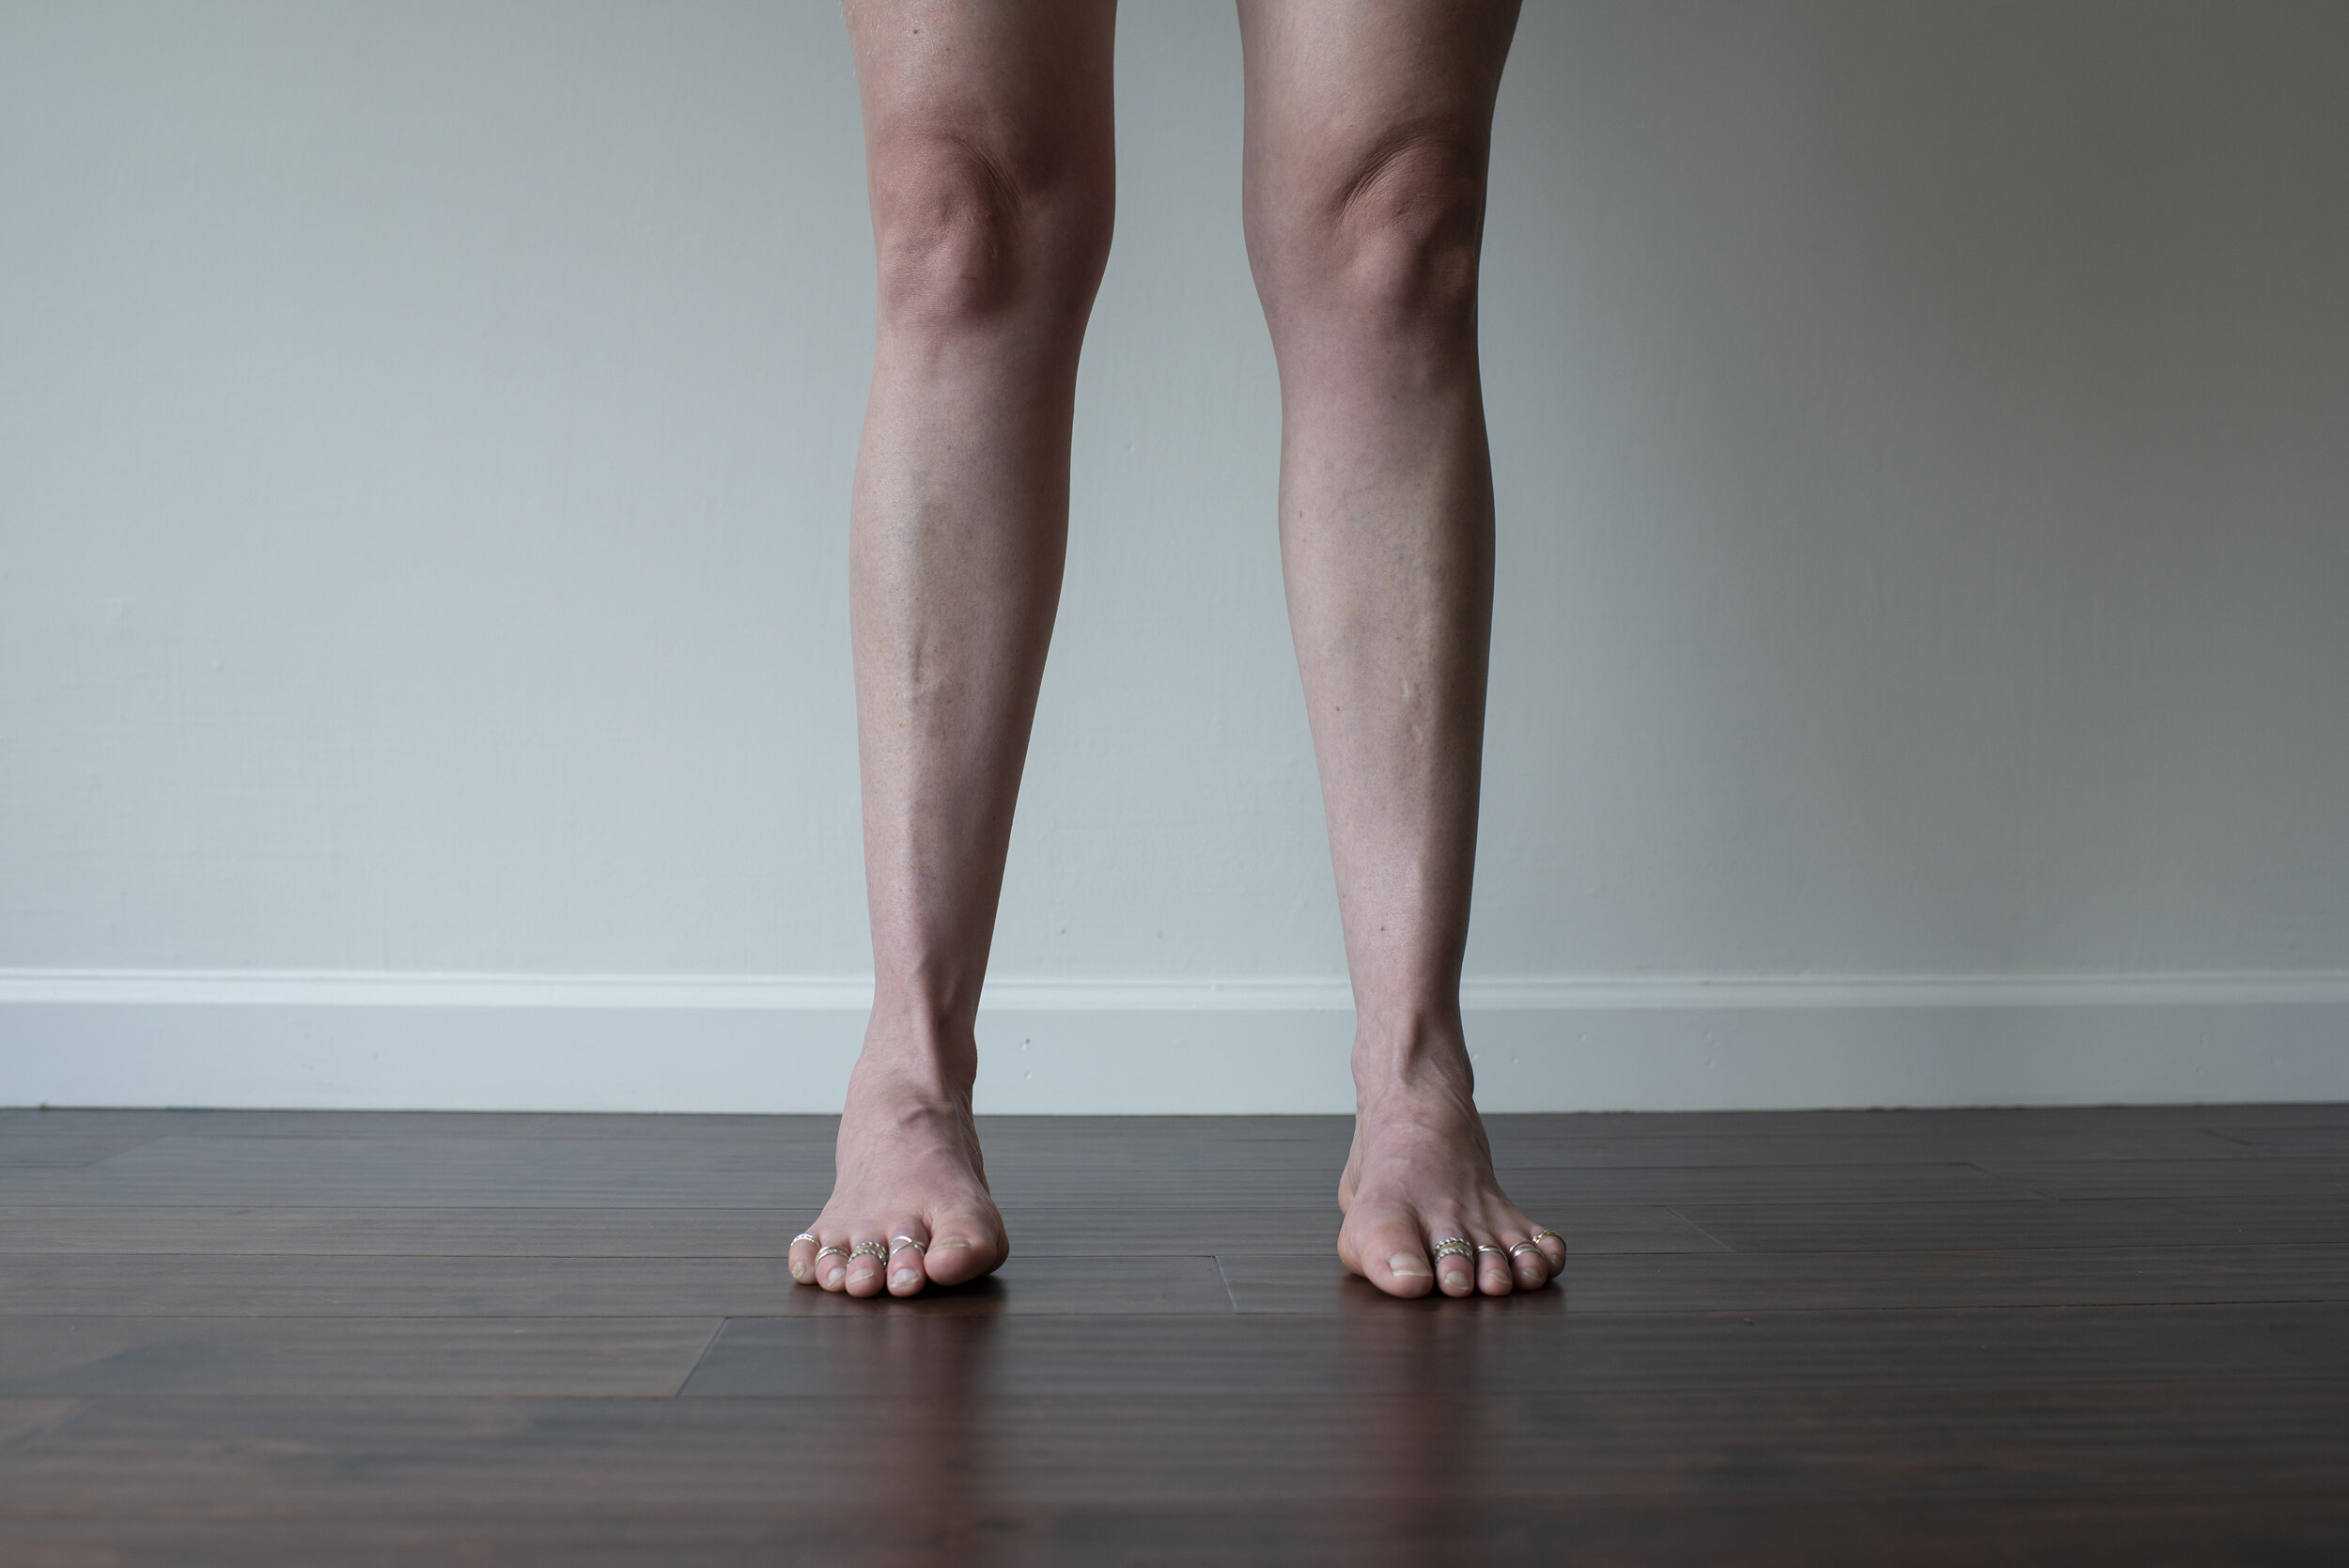 Pronation vs Supination  Learn the Differences and Impacts